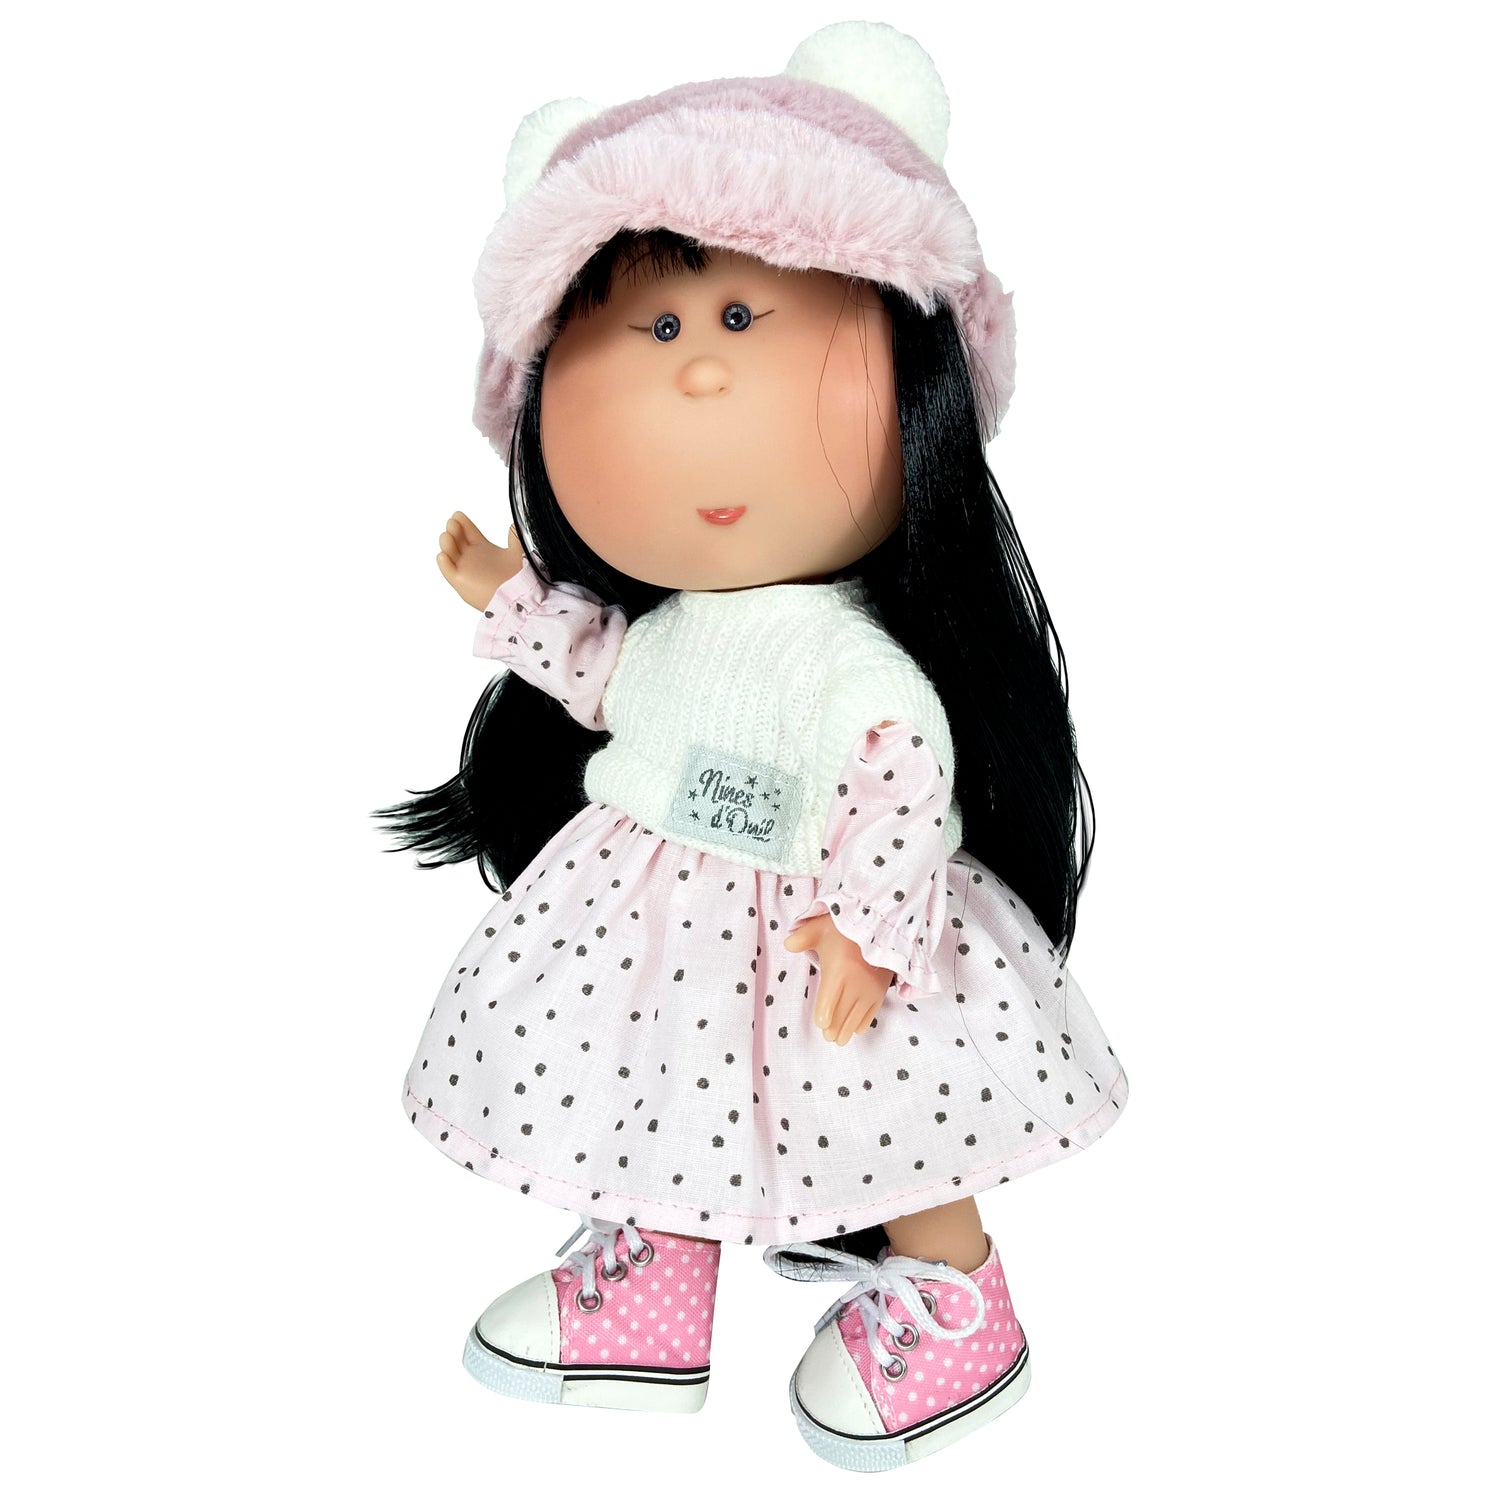 Handcrafted Collectible Mia Doll Dresses (Assorted) by Nines D&